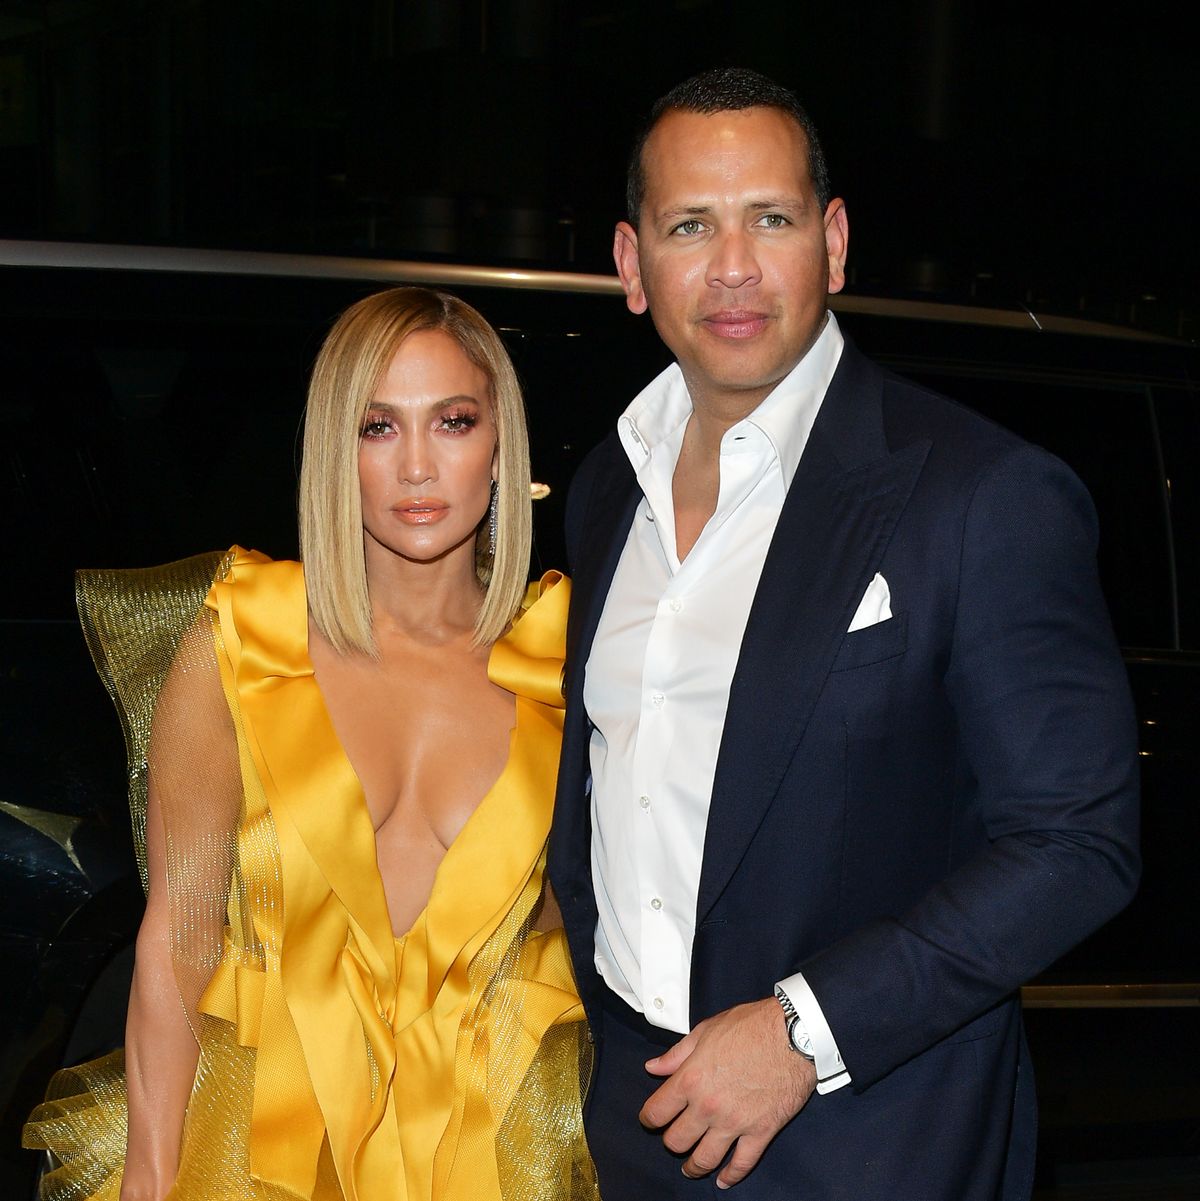 Alex Rodriguez Poses With Jennifer Lopez's Younger 'Fan Club' in a